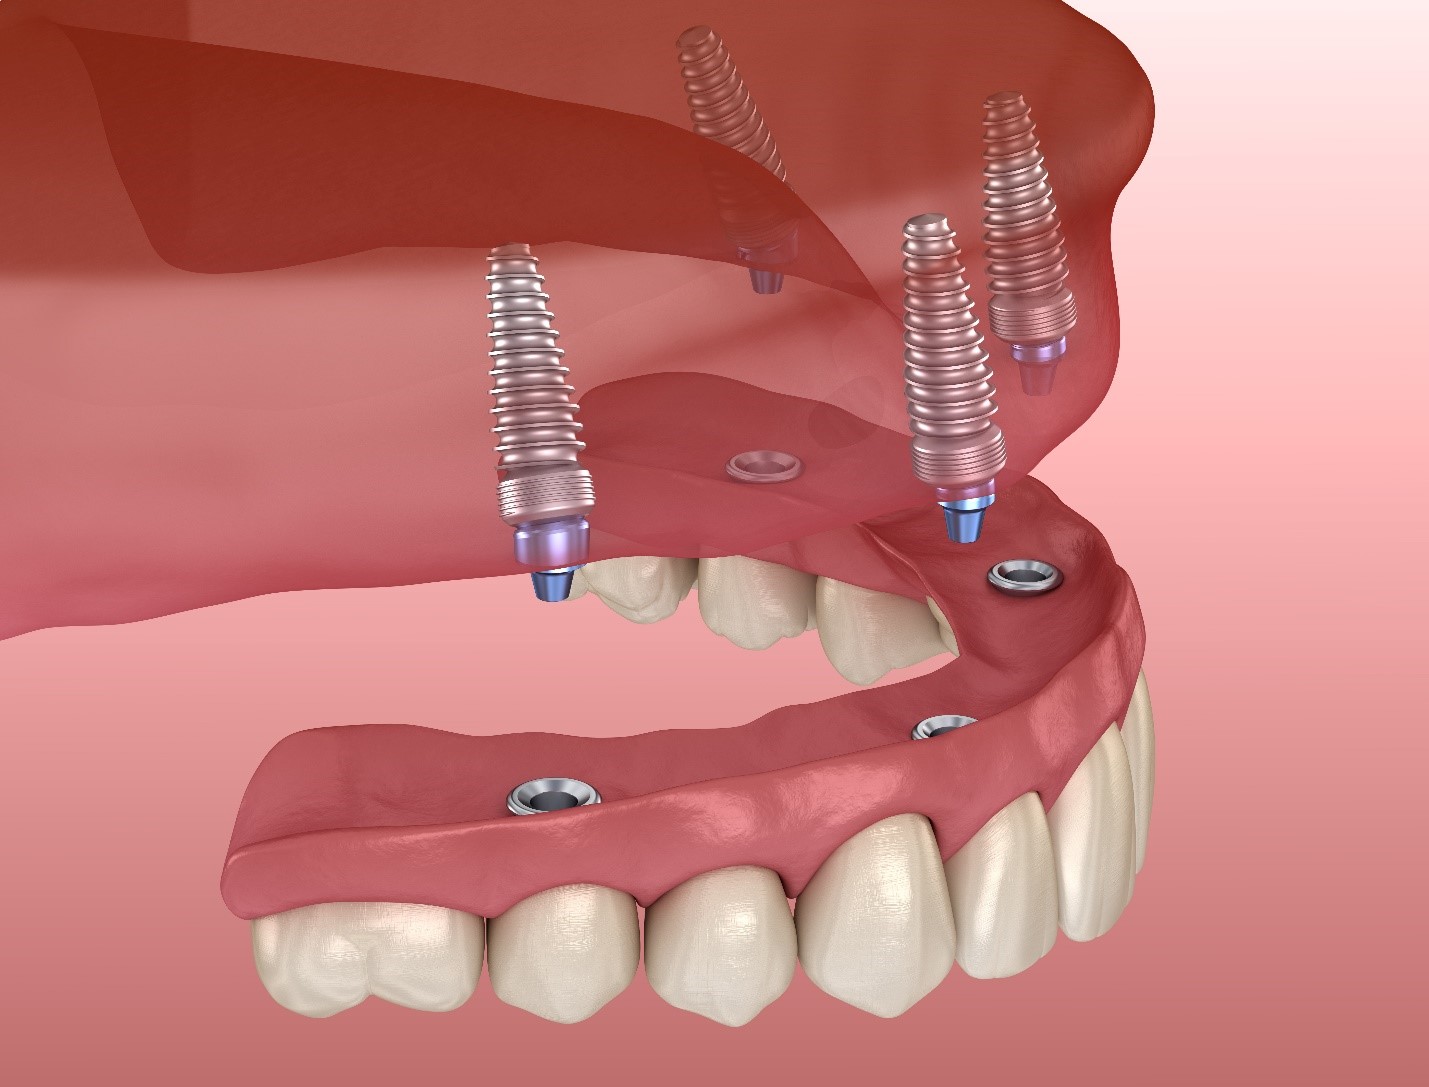 Can Your Teeth be Repaired or do you Need Dental Implants?